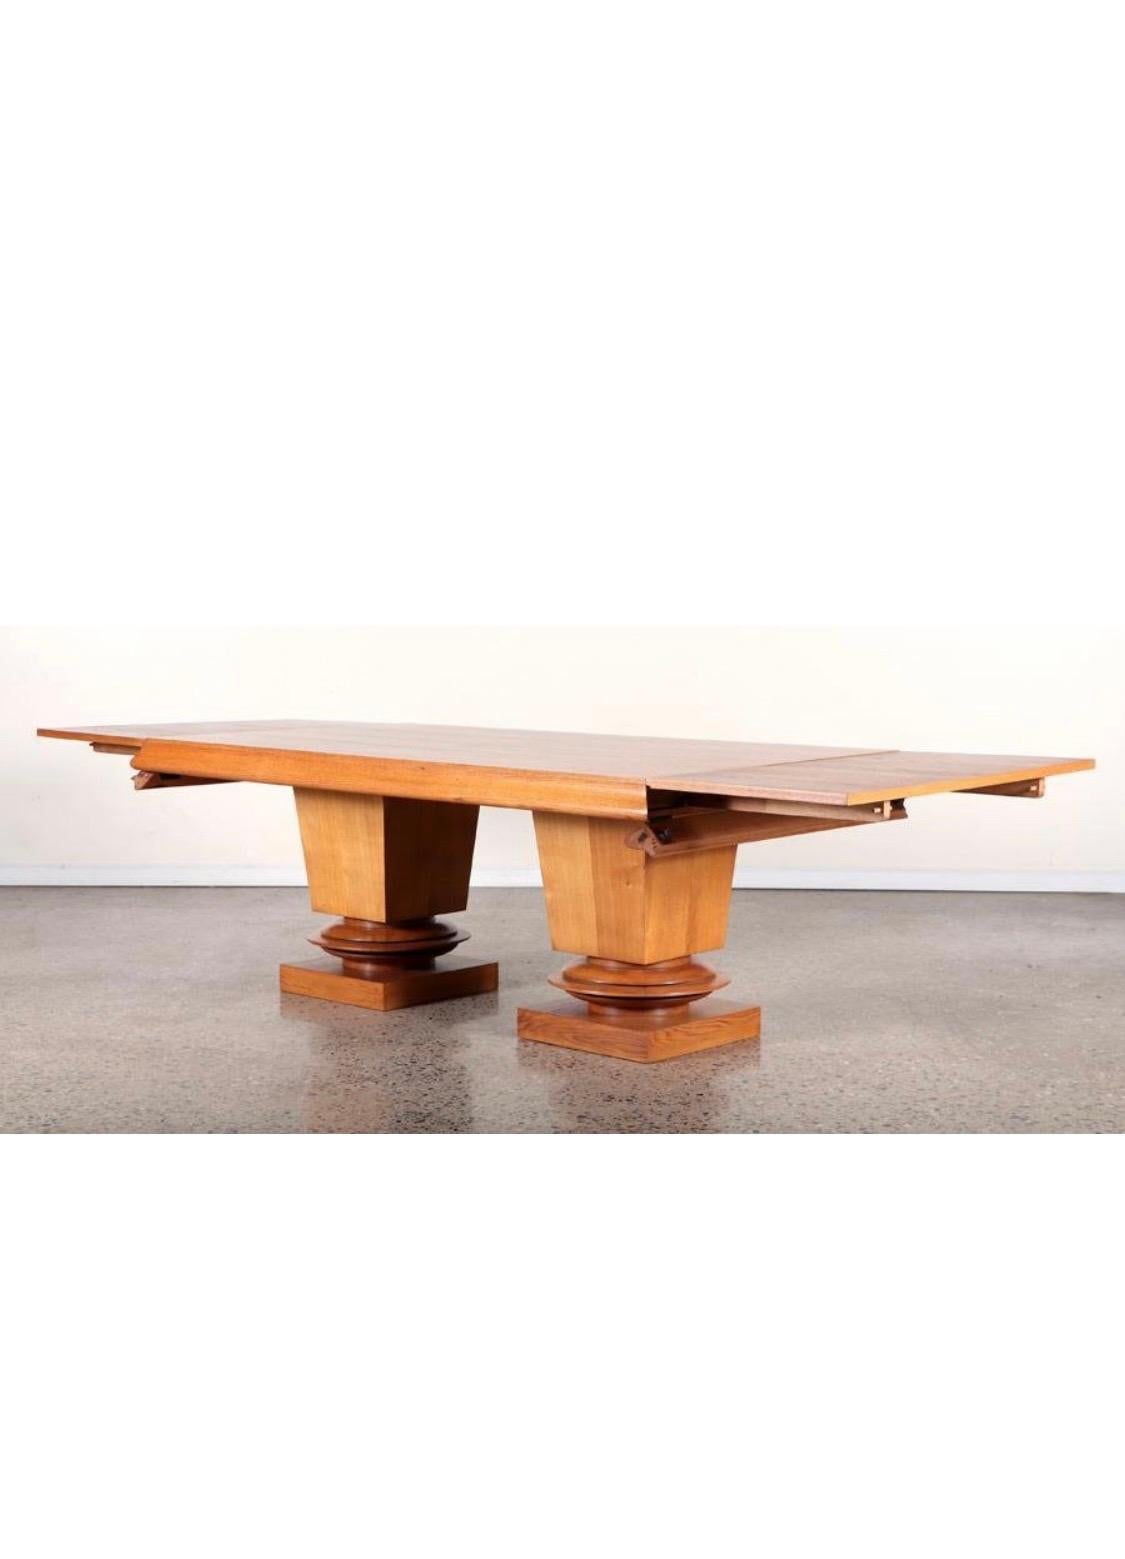 An outstanding French Oak Double Pedestal Dining Table. A double pedestal oak extension dining table by Albert Guenot, c. 1940. Substantial, sculptural pedestal legs 
Extension leaves pull out from either end of table by pulling edge down and